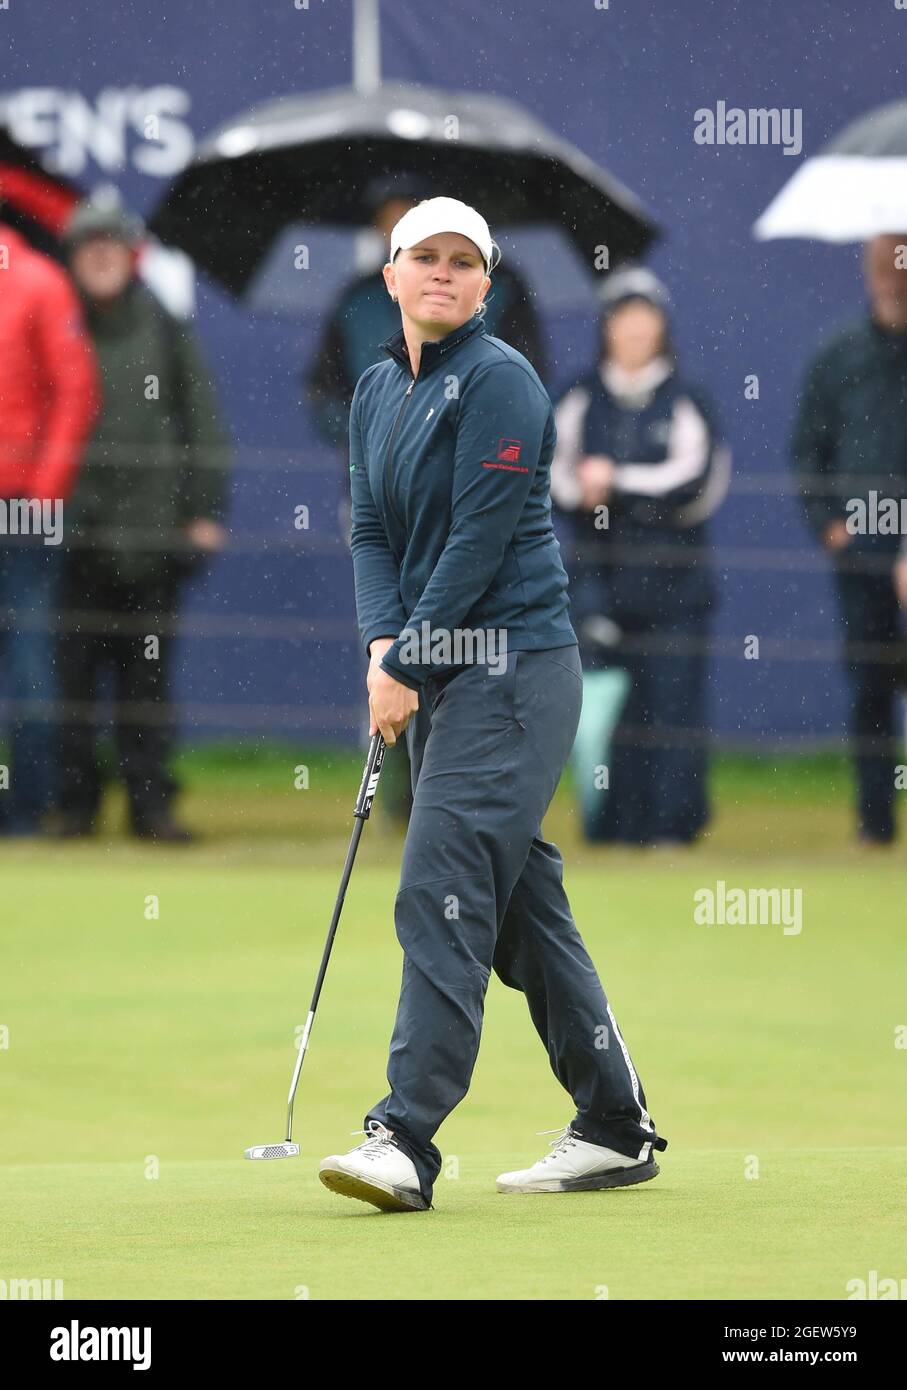 Denmark's Nanna Koerstz Madsen on the 18th green during day three of the AIG Women's Open at Carnoustie. Picture date: Saturday August 21, 2021. See PA story GOLF Women. Photo credit should read: Ian Rutherford/PA Wire. RESTRICTIONS: Use subject to restrictions. Editorial use only, no commercial use without prior consent from rights holder. Stock Photo